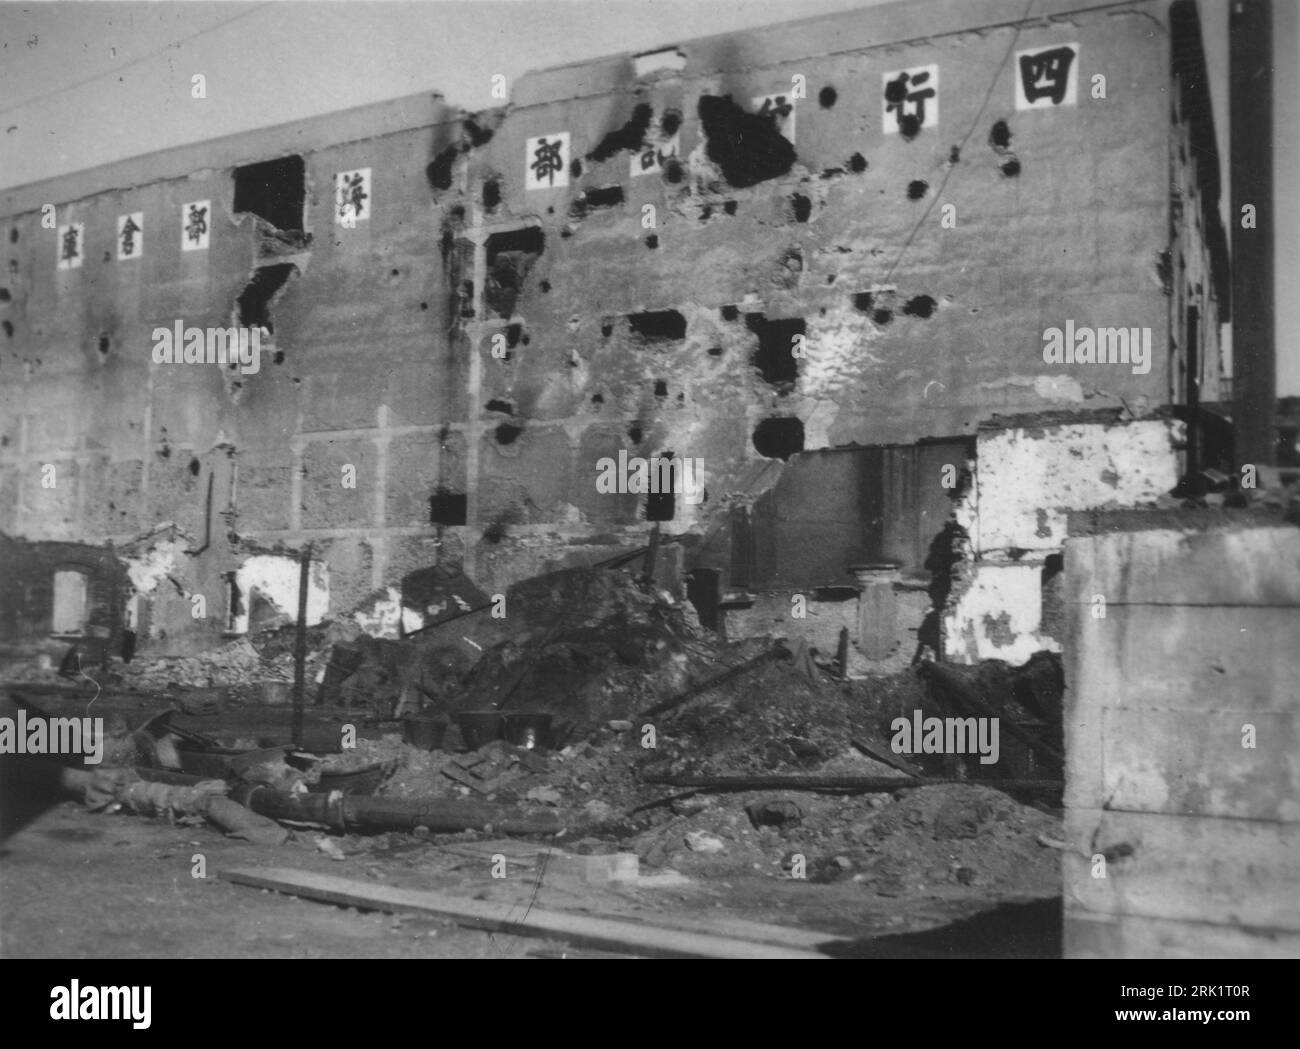 Second Sino-Japanese War, 1937—1945. The battered western wall of the Joint Trust Warehouse (Sihang Warehouse) following the Battle of Shanghai, August 13 - November 26 1937. The Sihang Warehouse served as the last stronghold for the 800 heroes of China's 'Lost Battalion' in their heroic four day stand against attacking Japanese troops during the invasion of Chapei from October 27 - 31, 1937. Stock Photo